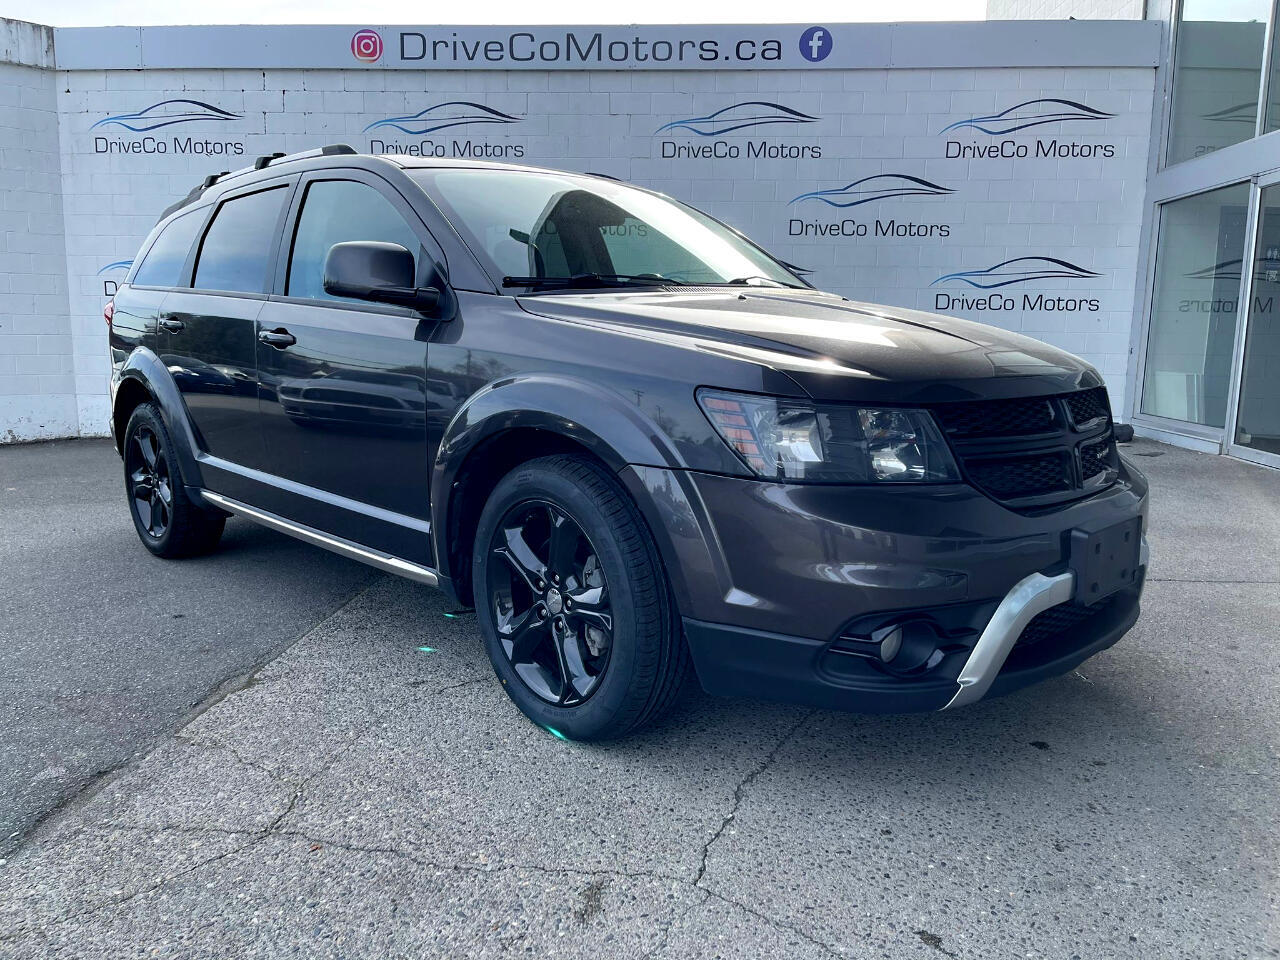 2018 Dodge Journey CROSSROAD 7 PASS LEATHER ROOF NAVI REAR ENT